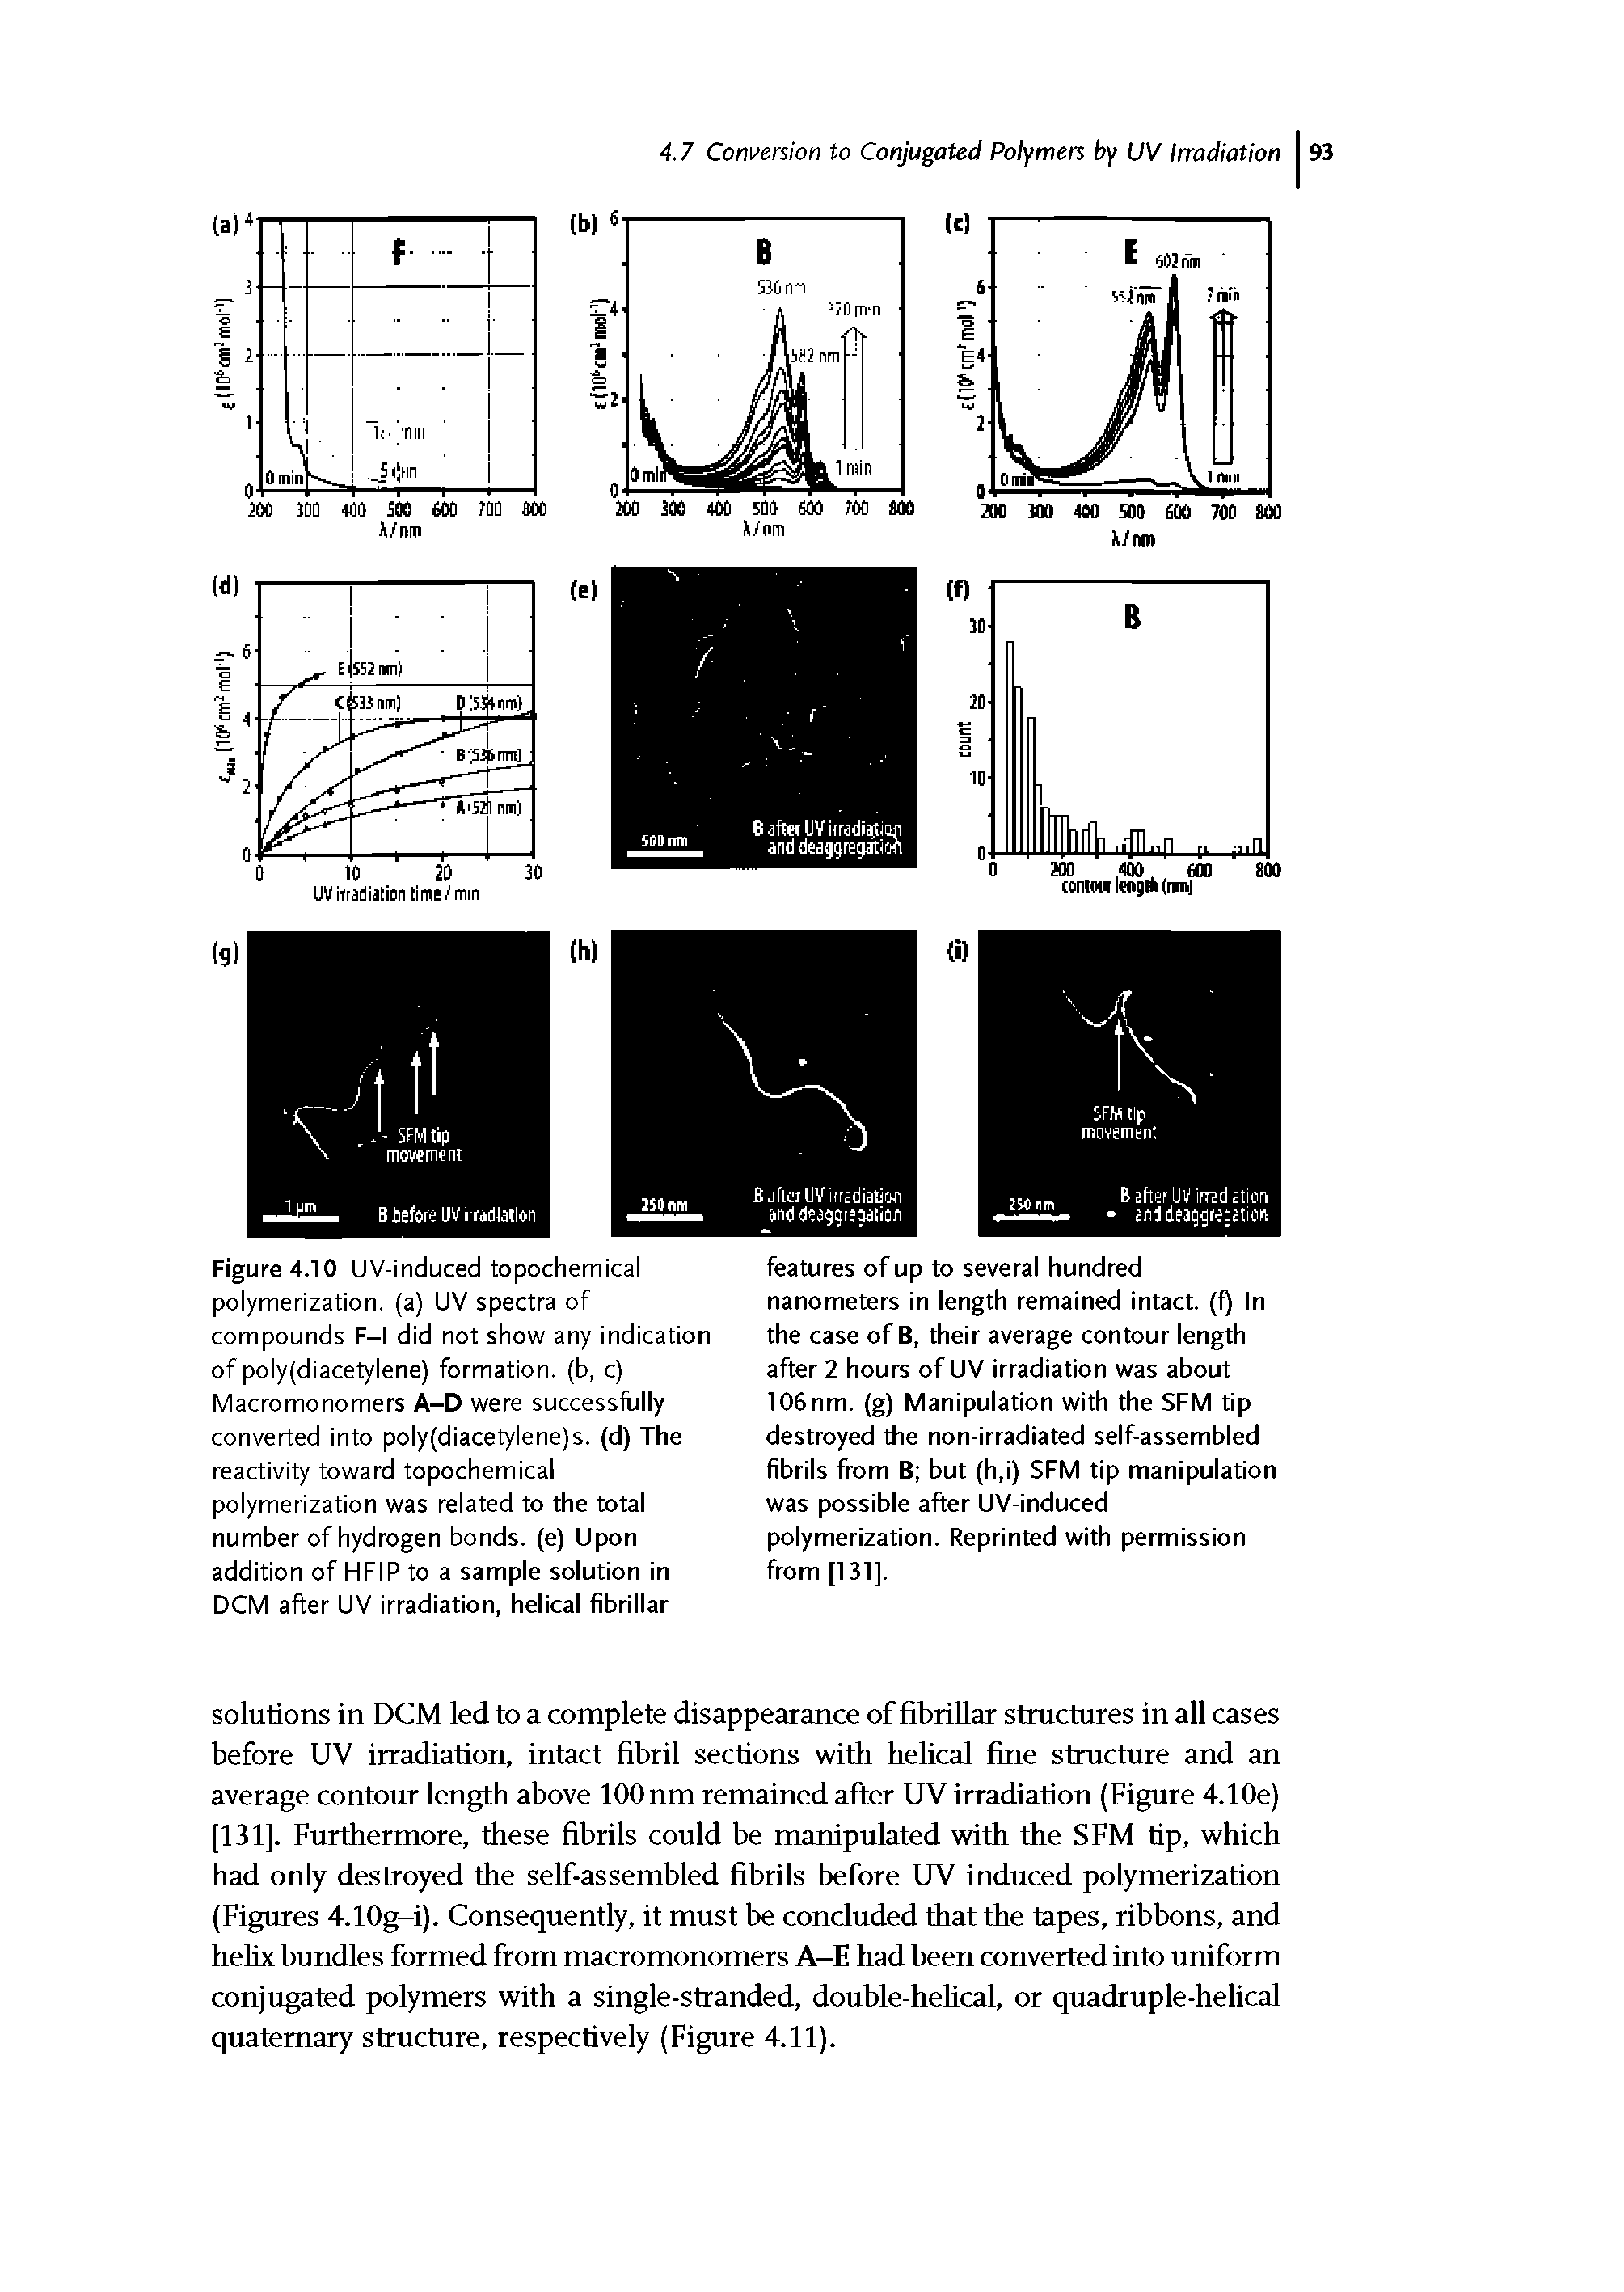 Figure 4.10 UV-induced topochemical polymerization, (a) UV spectra of compounds F-l did not show any indication of poly(diacetylene) formation, (b, c) Macromonomers A-D were successfully converted into poly(diacetylene)s. (d) The reactivity toward topochemical polymerization was related to the total number of hydrogen bonds, (e) Upon addition of HFIP to a sample solution in DCM after UV irradiation, helical fibrillar...